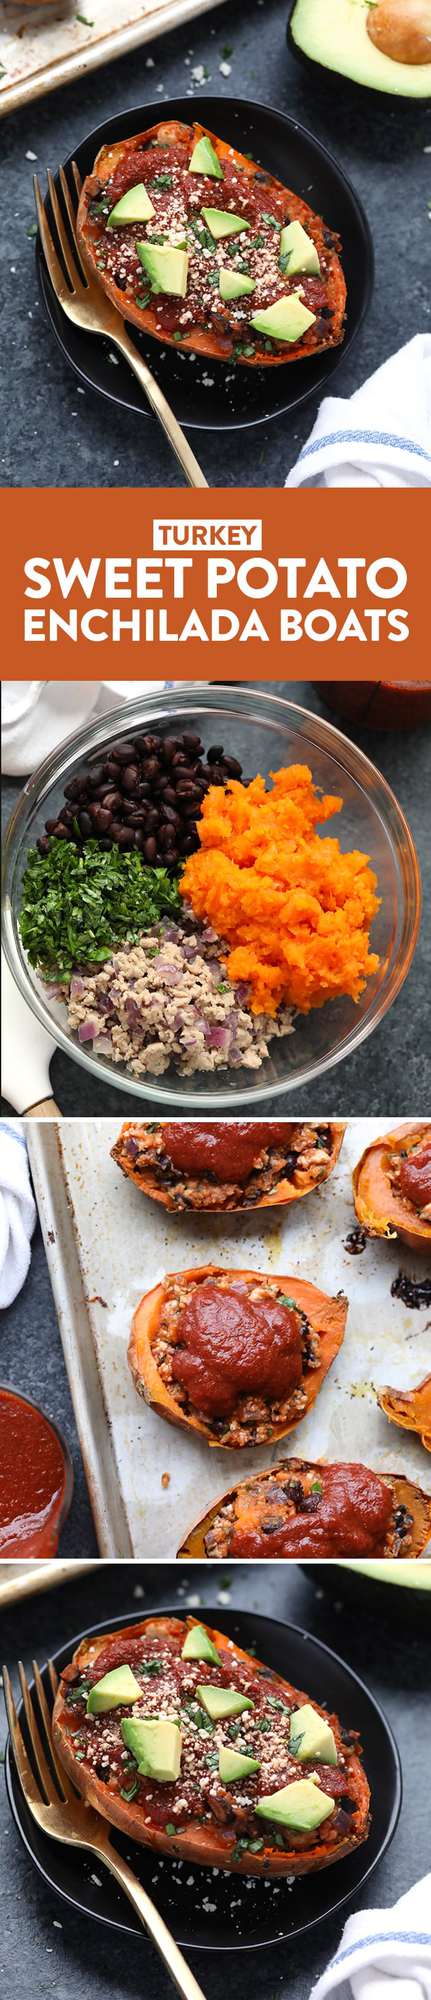 These Twice-Baked Turkey Sweet Potato Enchilada Boats are healthy, packed with nutrients, and a delicious spin on your favorite enchilada flavors! These delicious potatoes are perfect for meal-prep or a fun weeknight dinner!